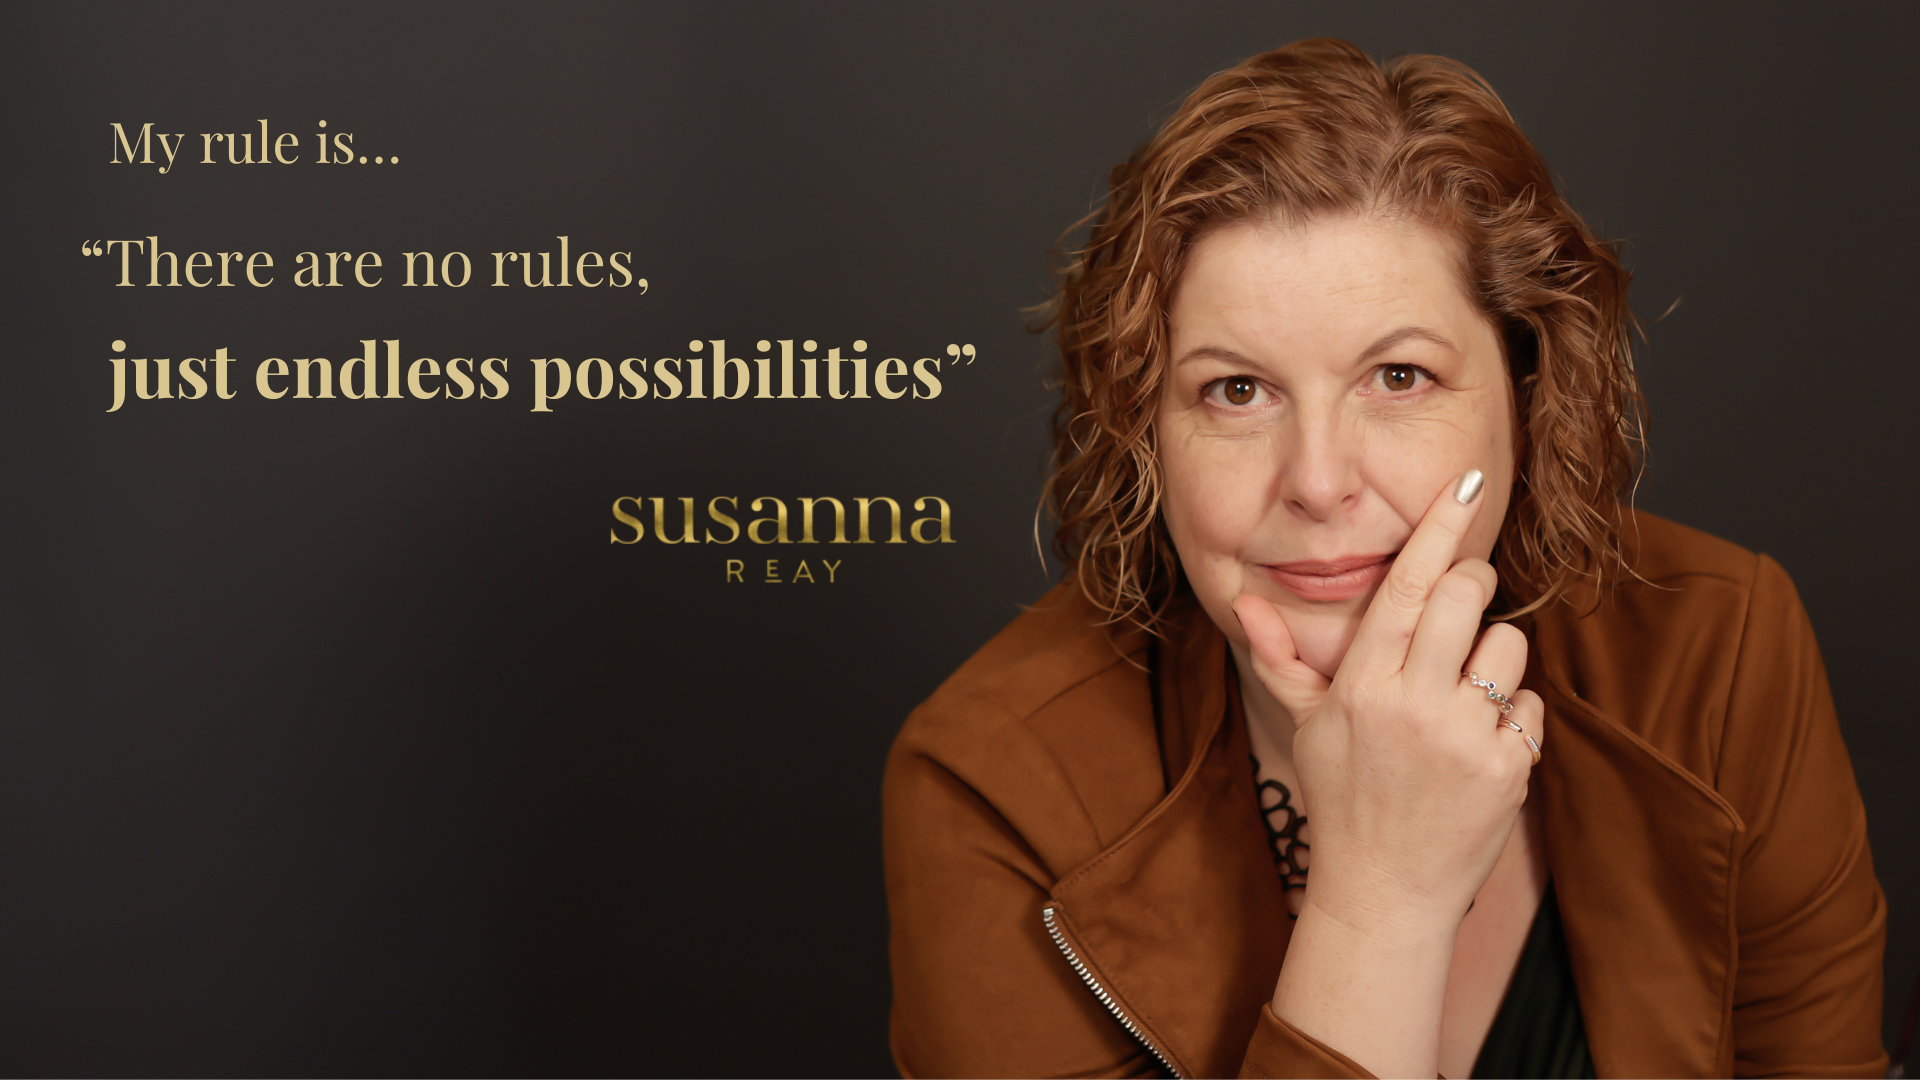 My rule is “there are no rules, just endless possibilities” Susanna Reay